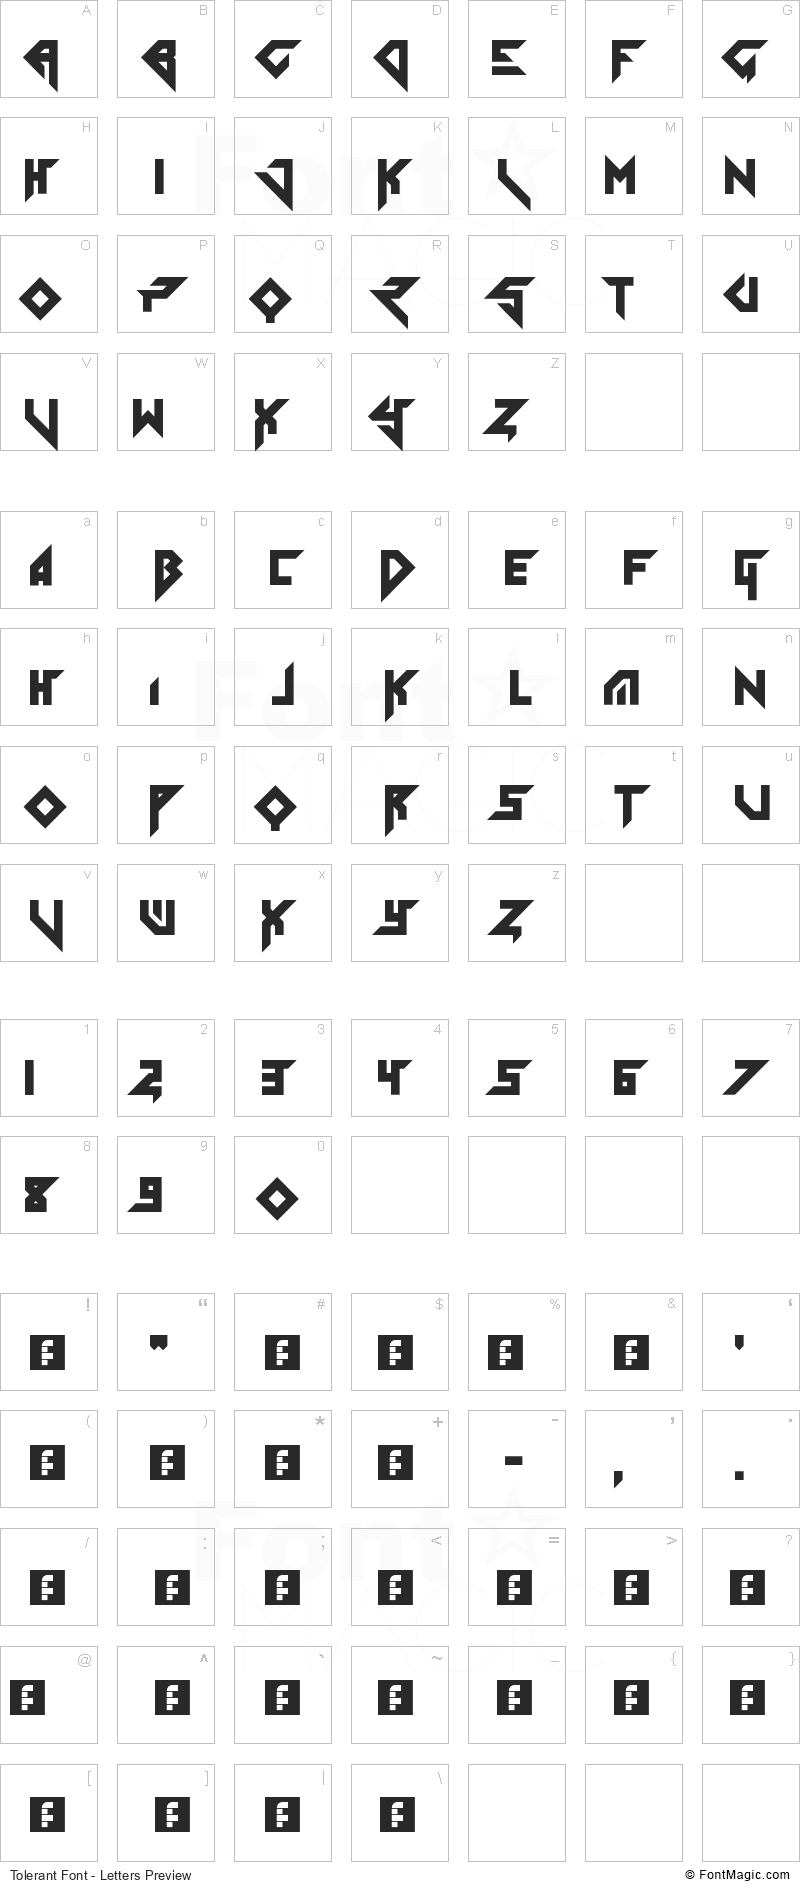 Tolerant Font - All Latters Preview Chart